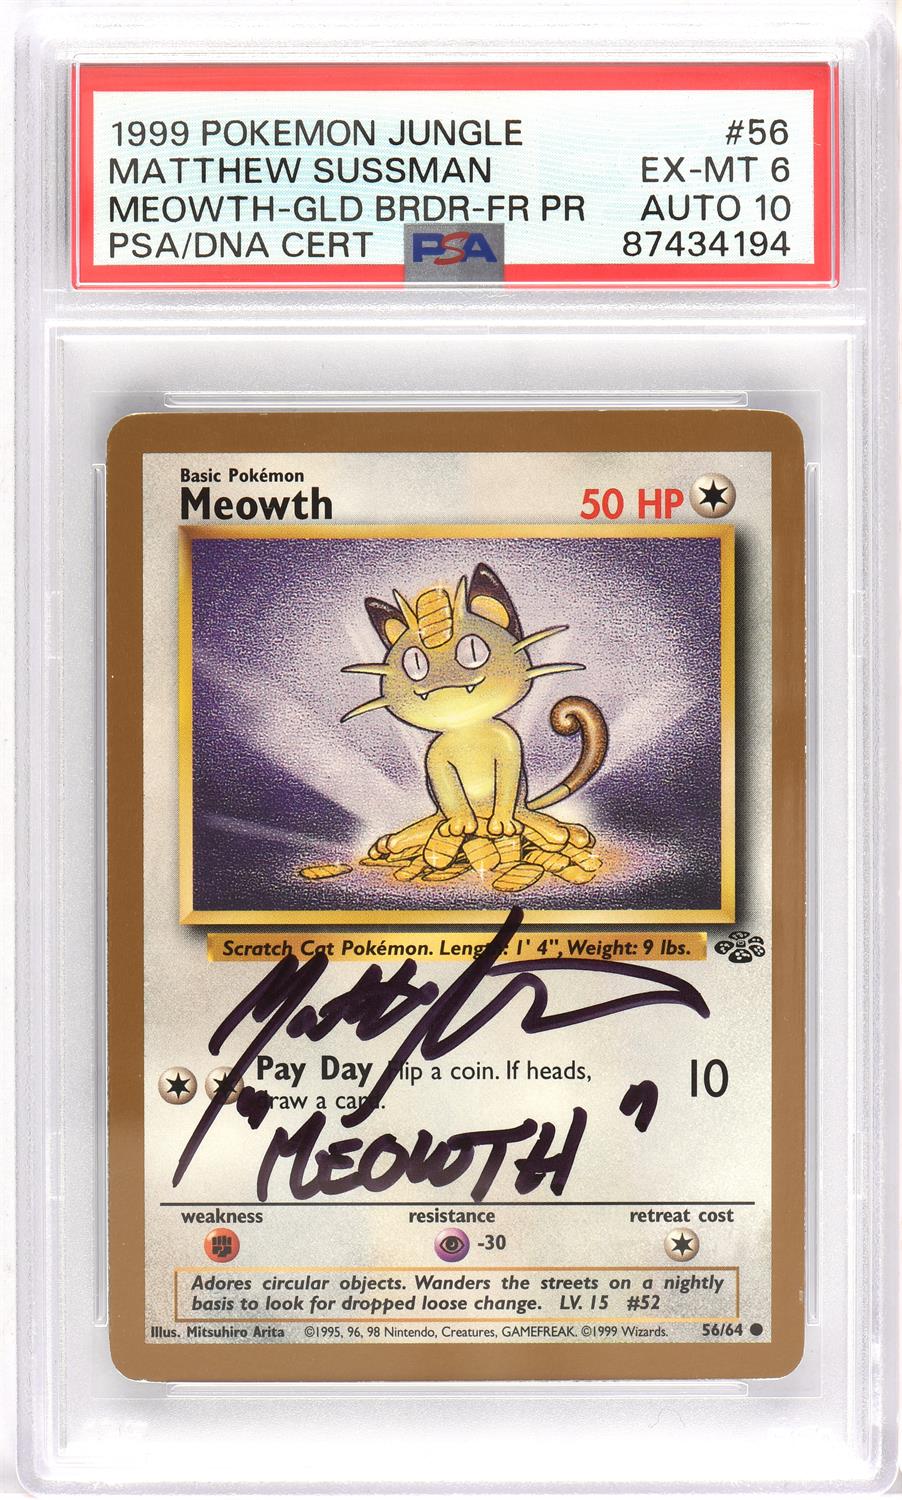 Pokemon TCG. Meowth Gold Fruit Roll Jungle Promo 56/64 Signed by Matthew Sussman who voiced Meowth